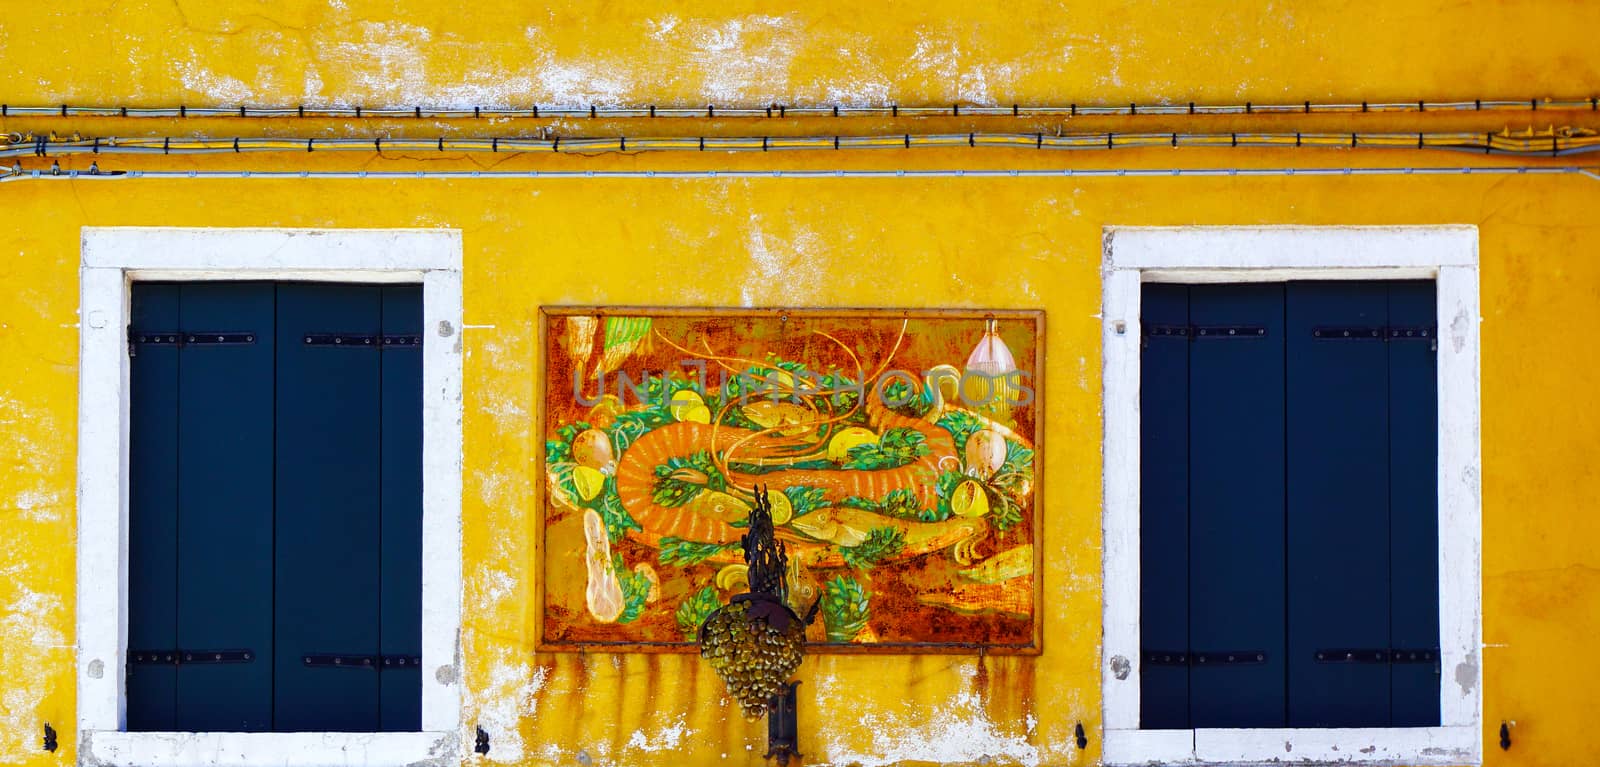 Two Windows with white frame in Burano on yellow color decay wall building architecture, Venice, Italy